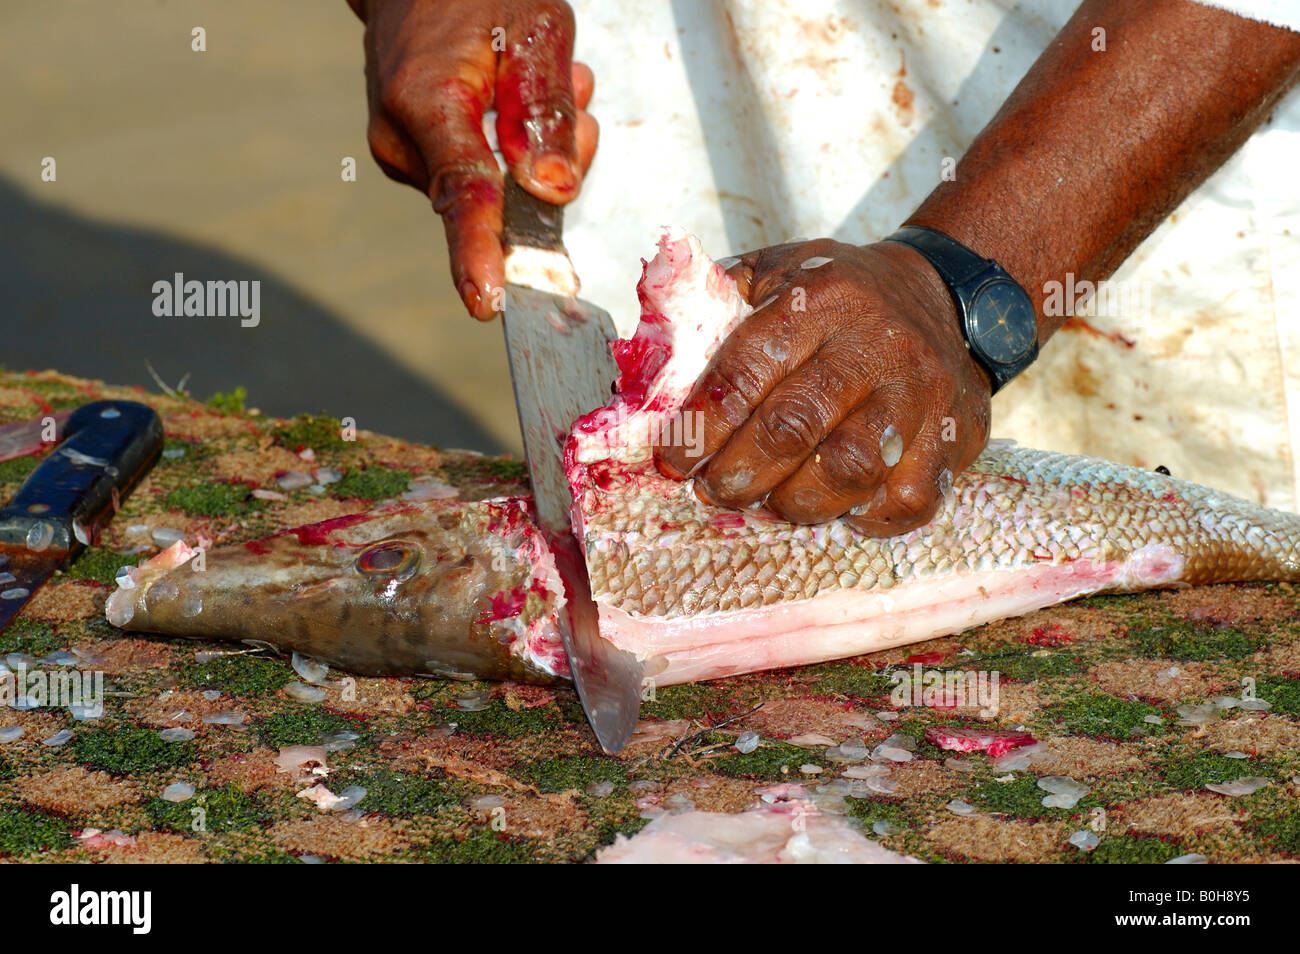 Fishmonger cleaning fresh fish, Sur, Oman, Middle East Stock Photo